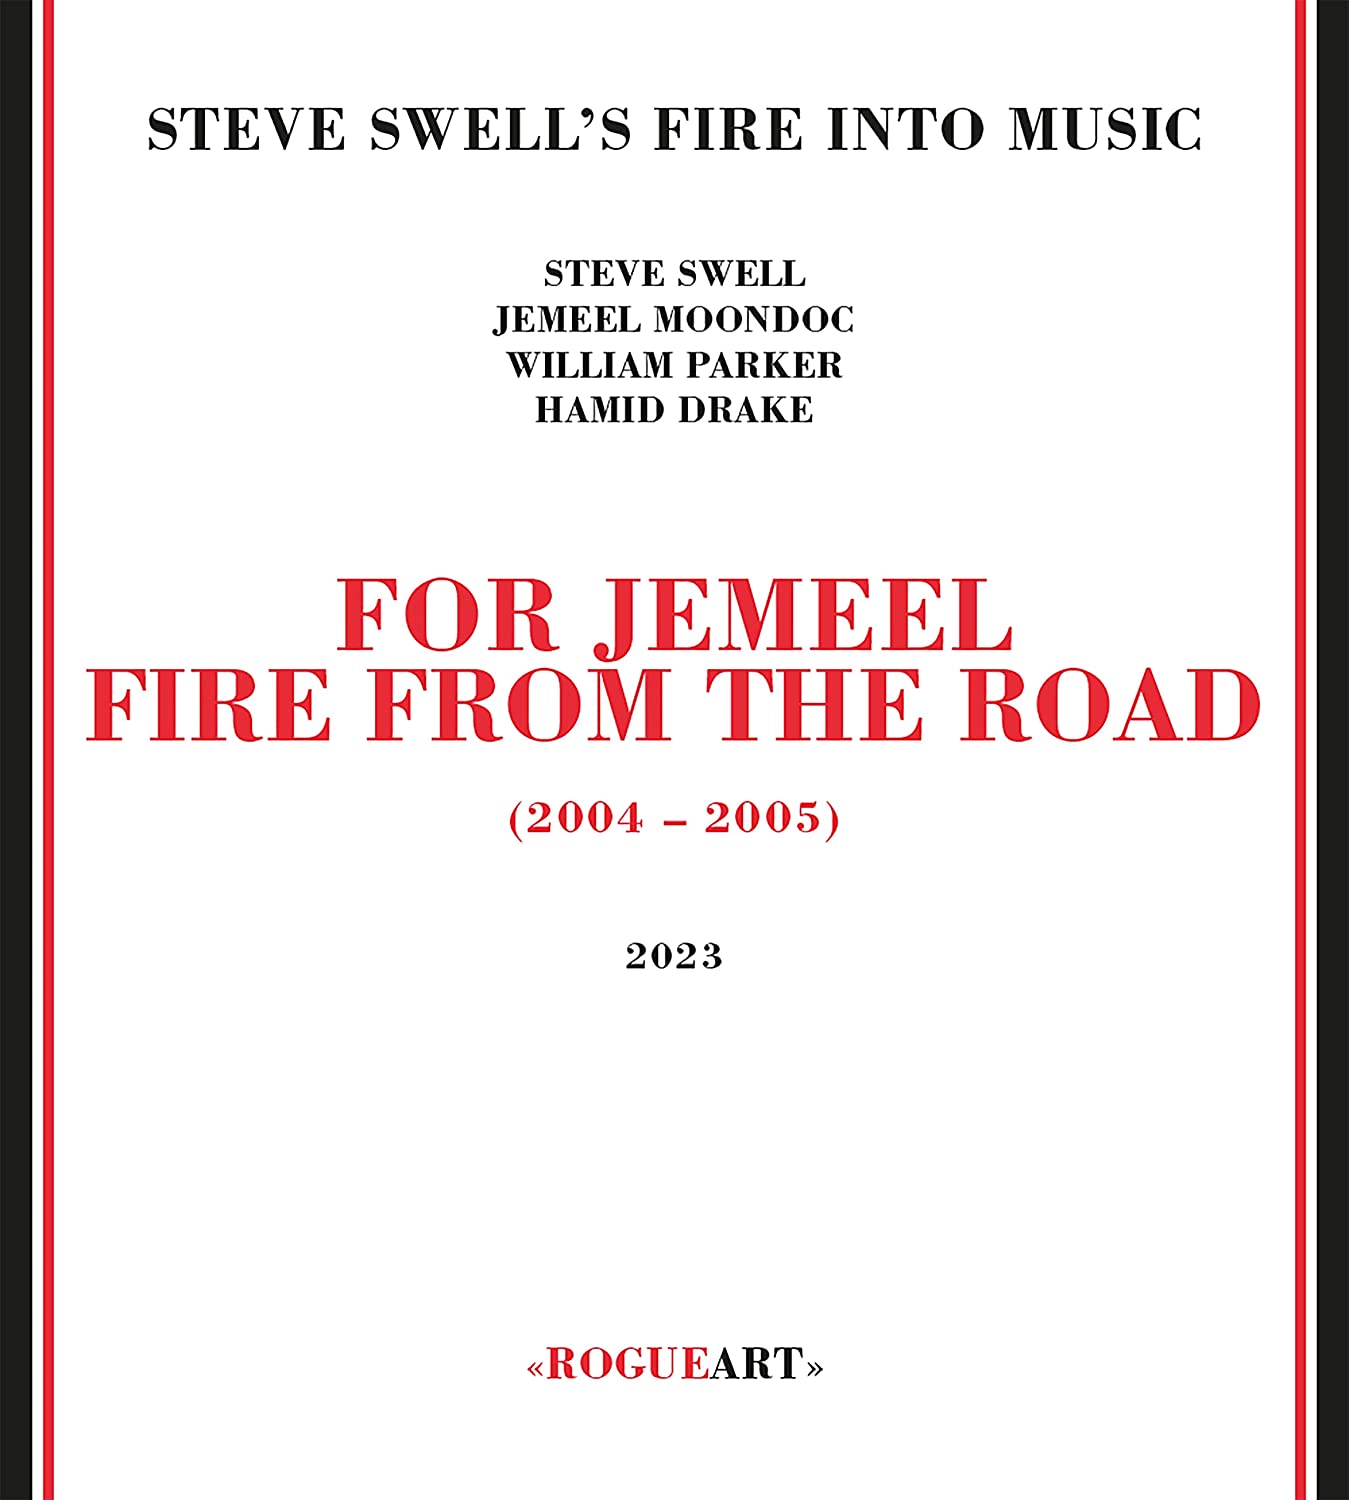 STEVE SWELL - Steve Swell's Fire Into Music : For Jemeel - Fire From The Road cover 